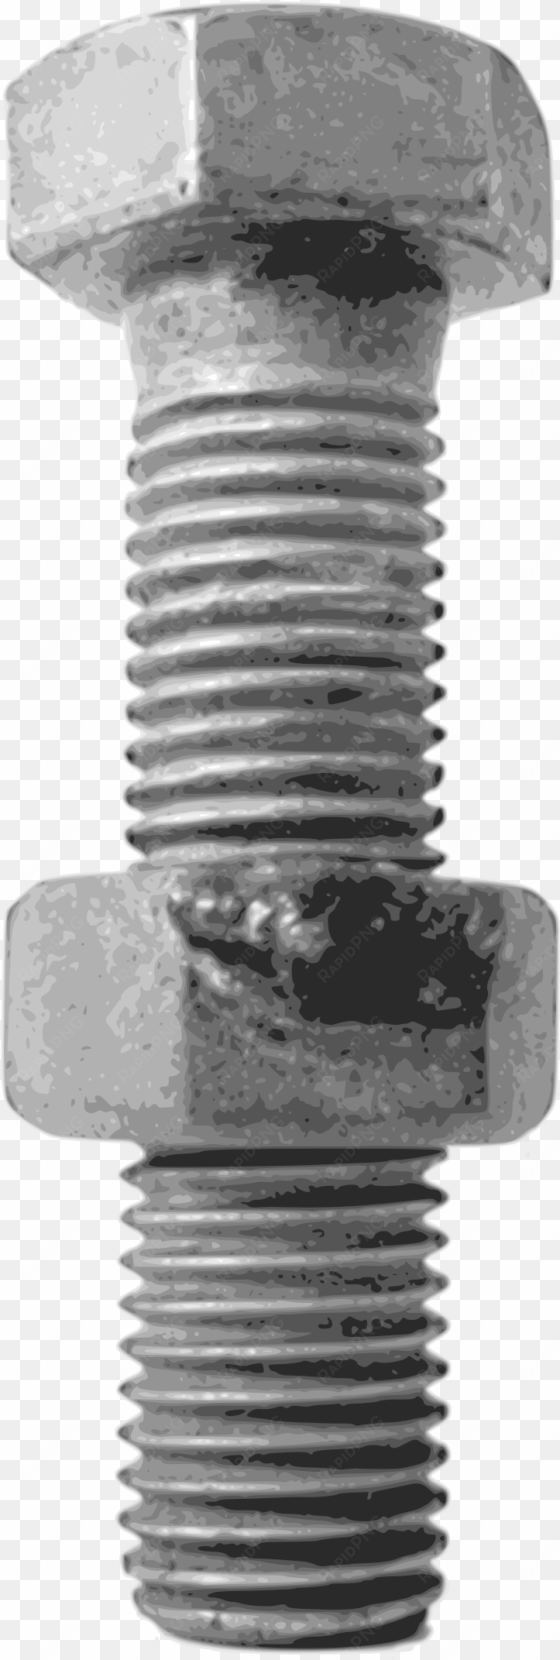 Nut Clipart Animated - Bolt And Nut Png transparent png image